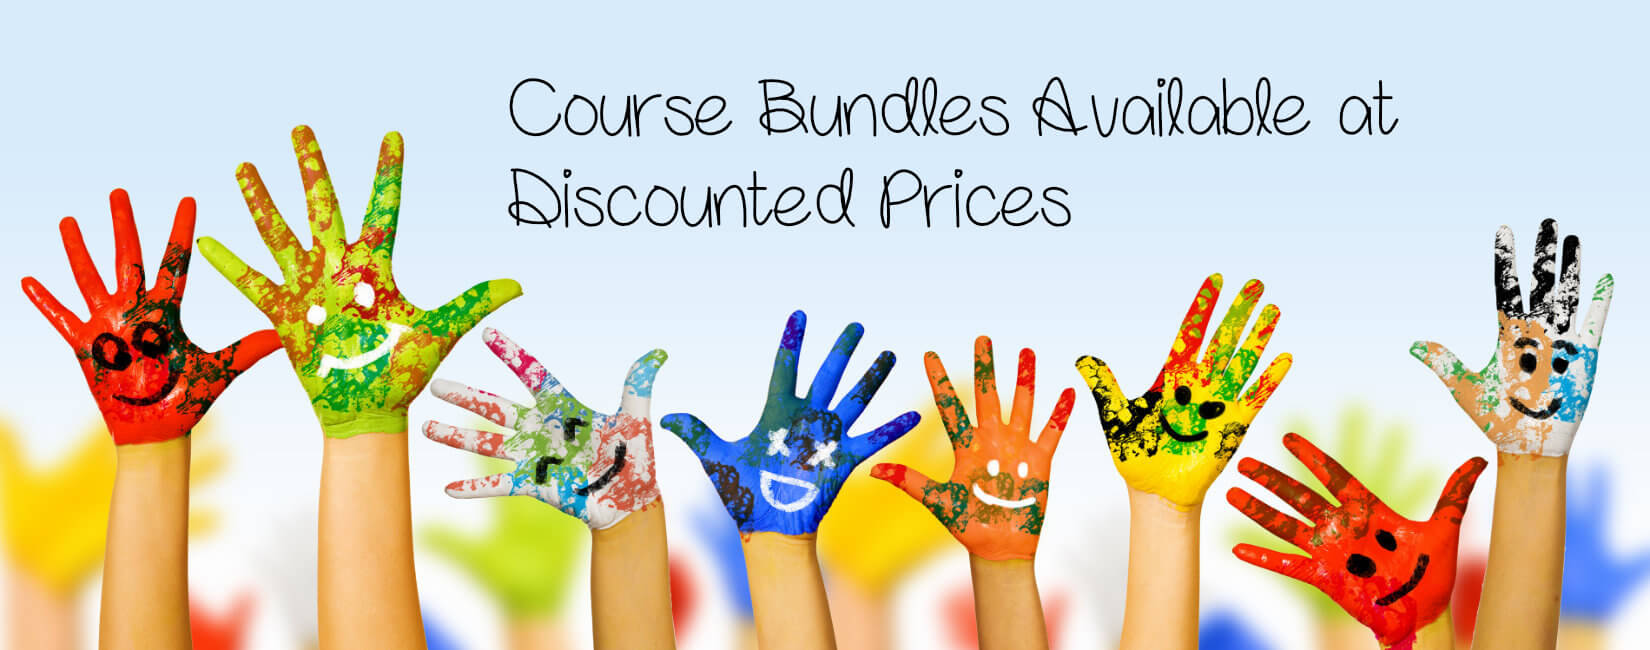 Discounted paediatric first aid training course bundles available